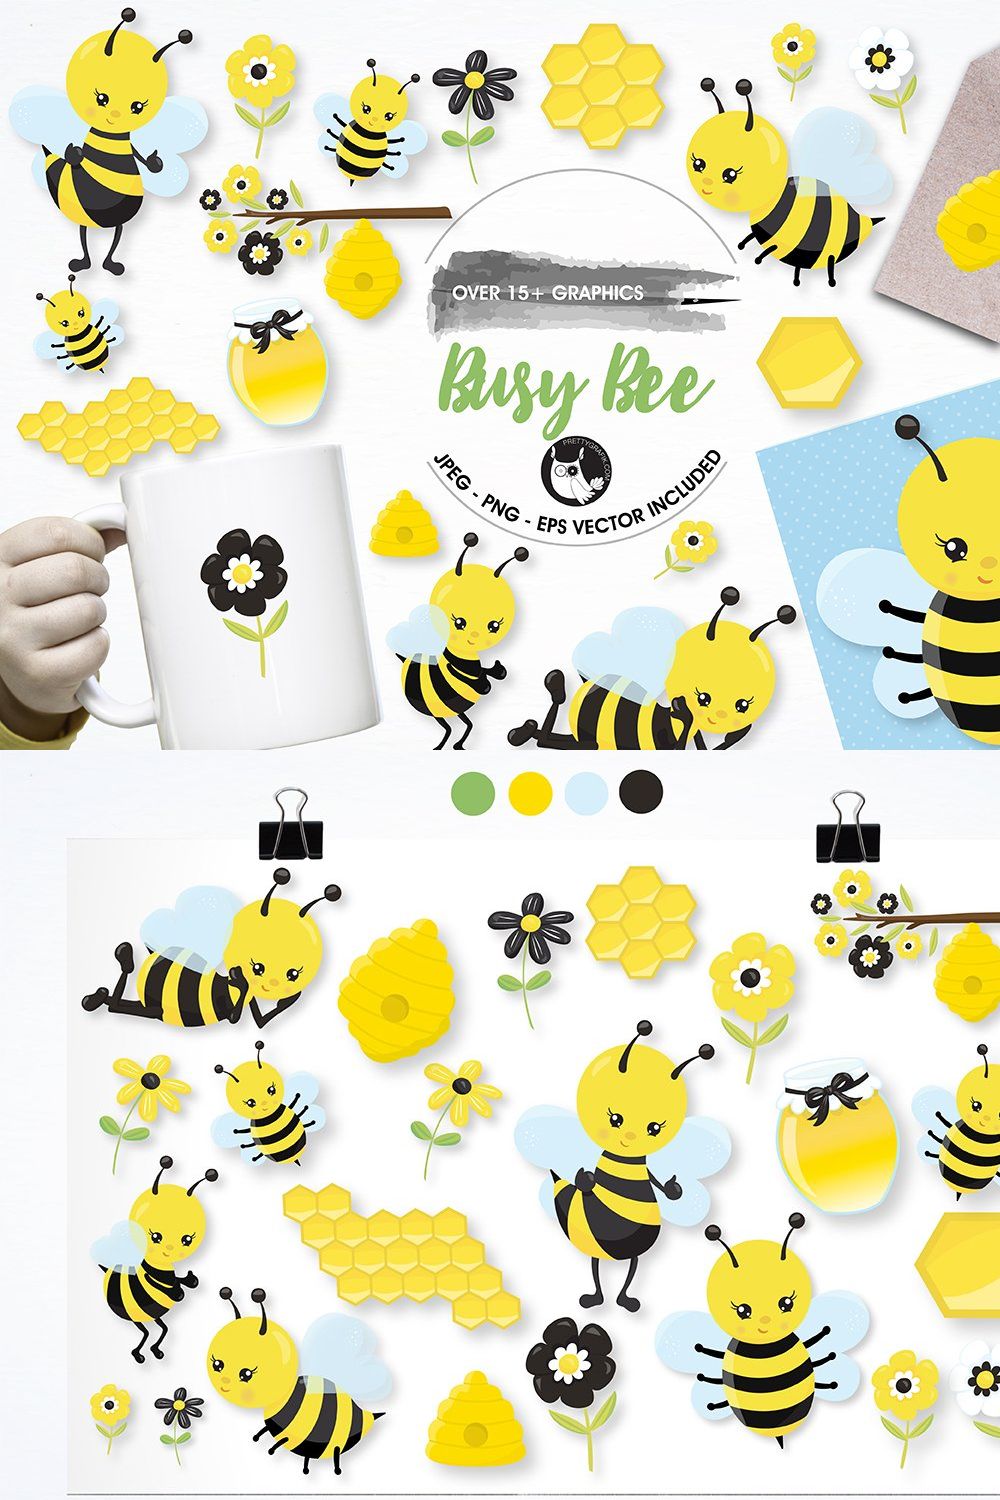 Busy bee graphics and illustrations pinterest preview image.